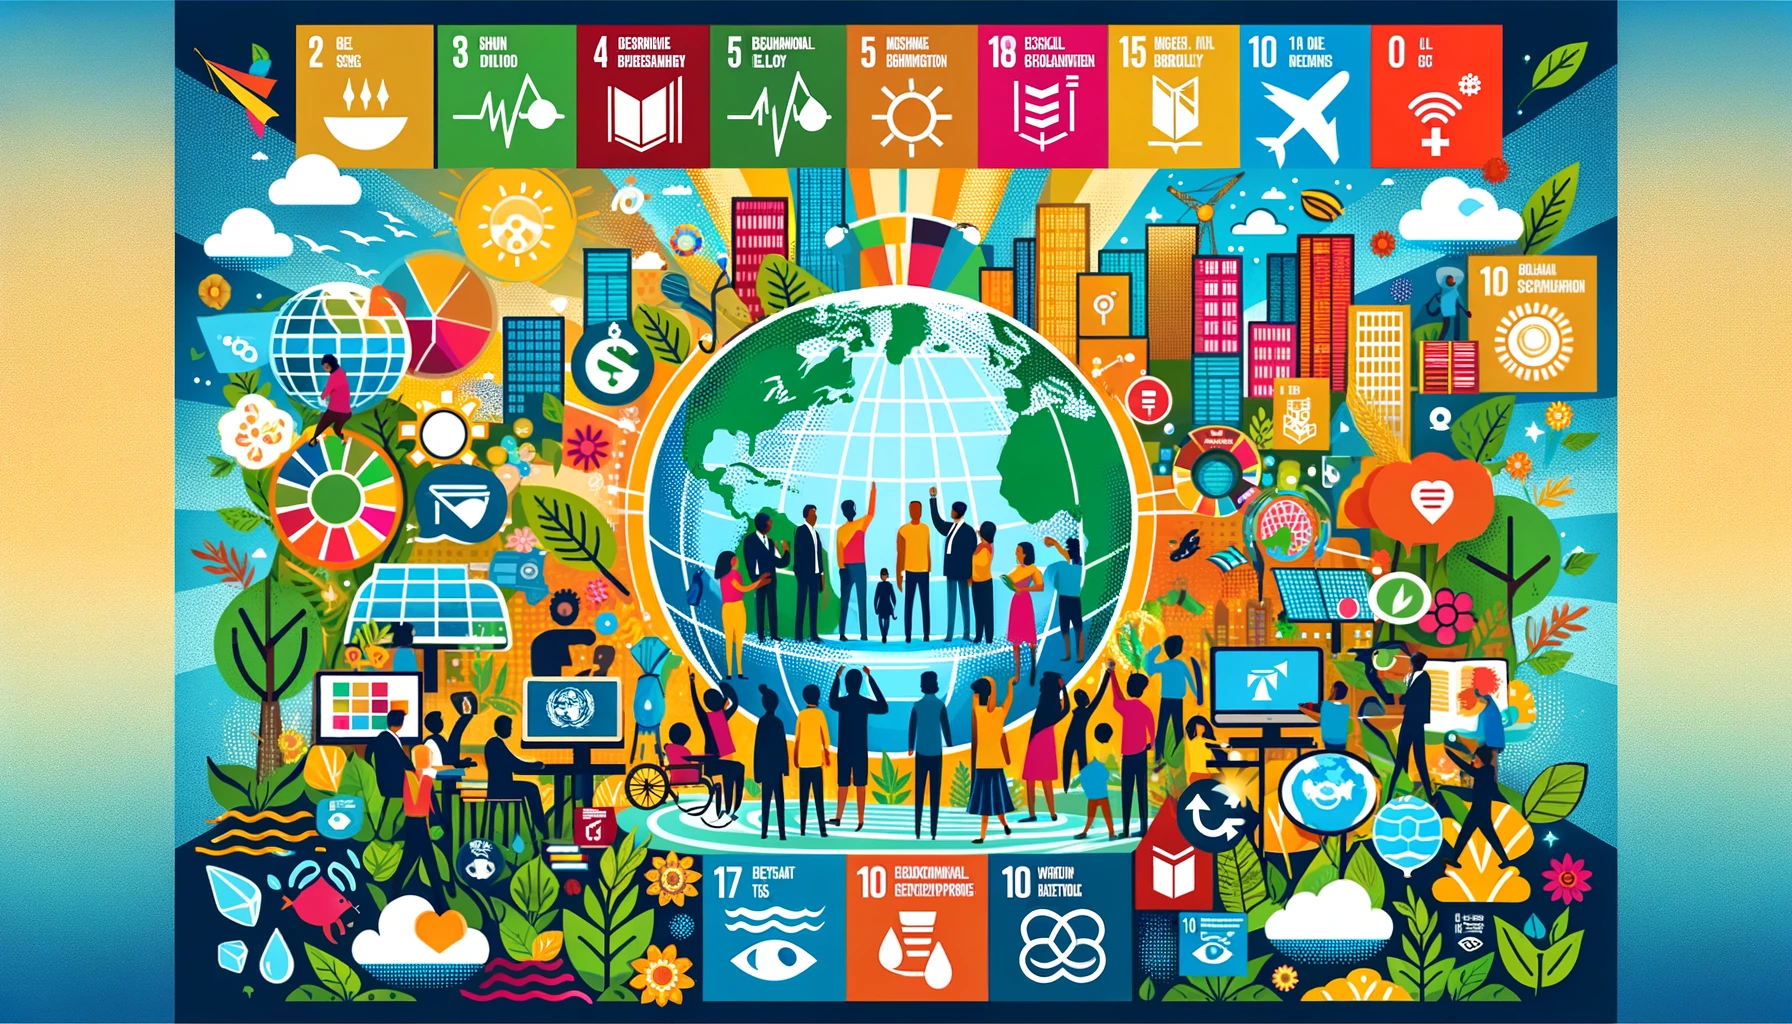 Achieving Sustainable Development Goals Today